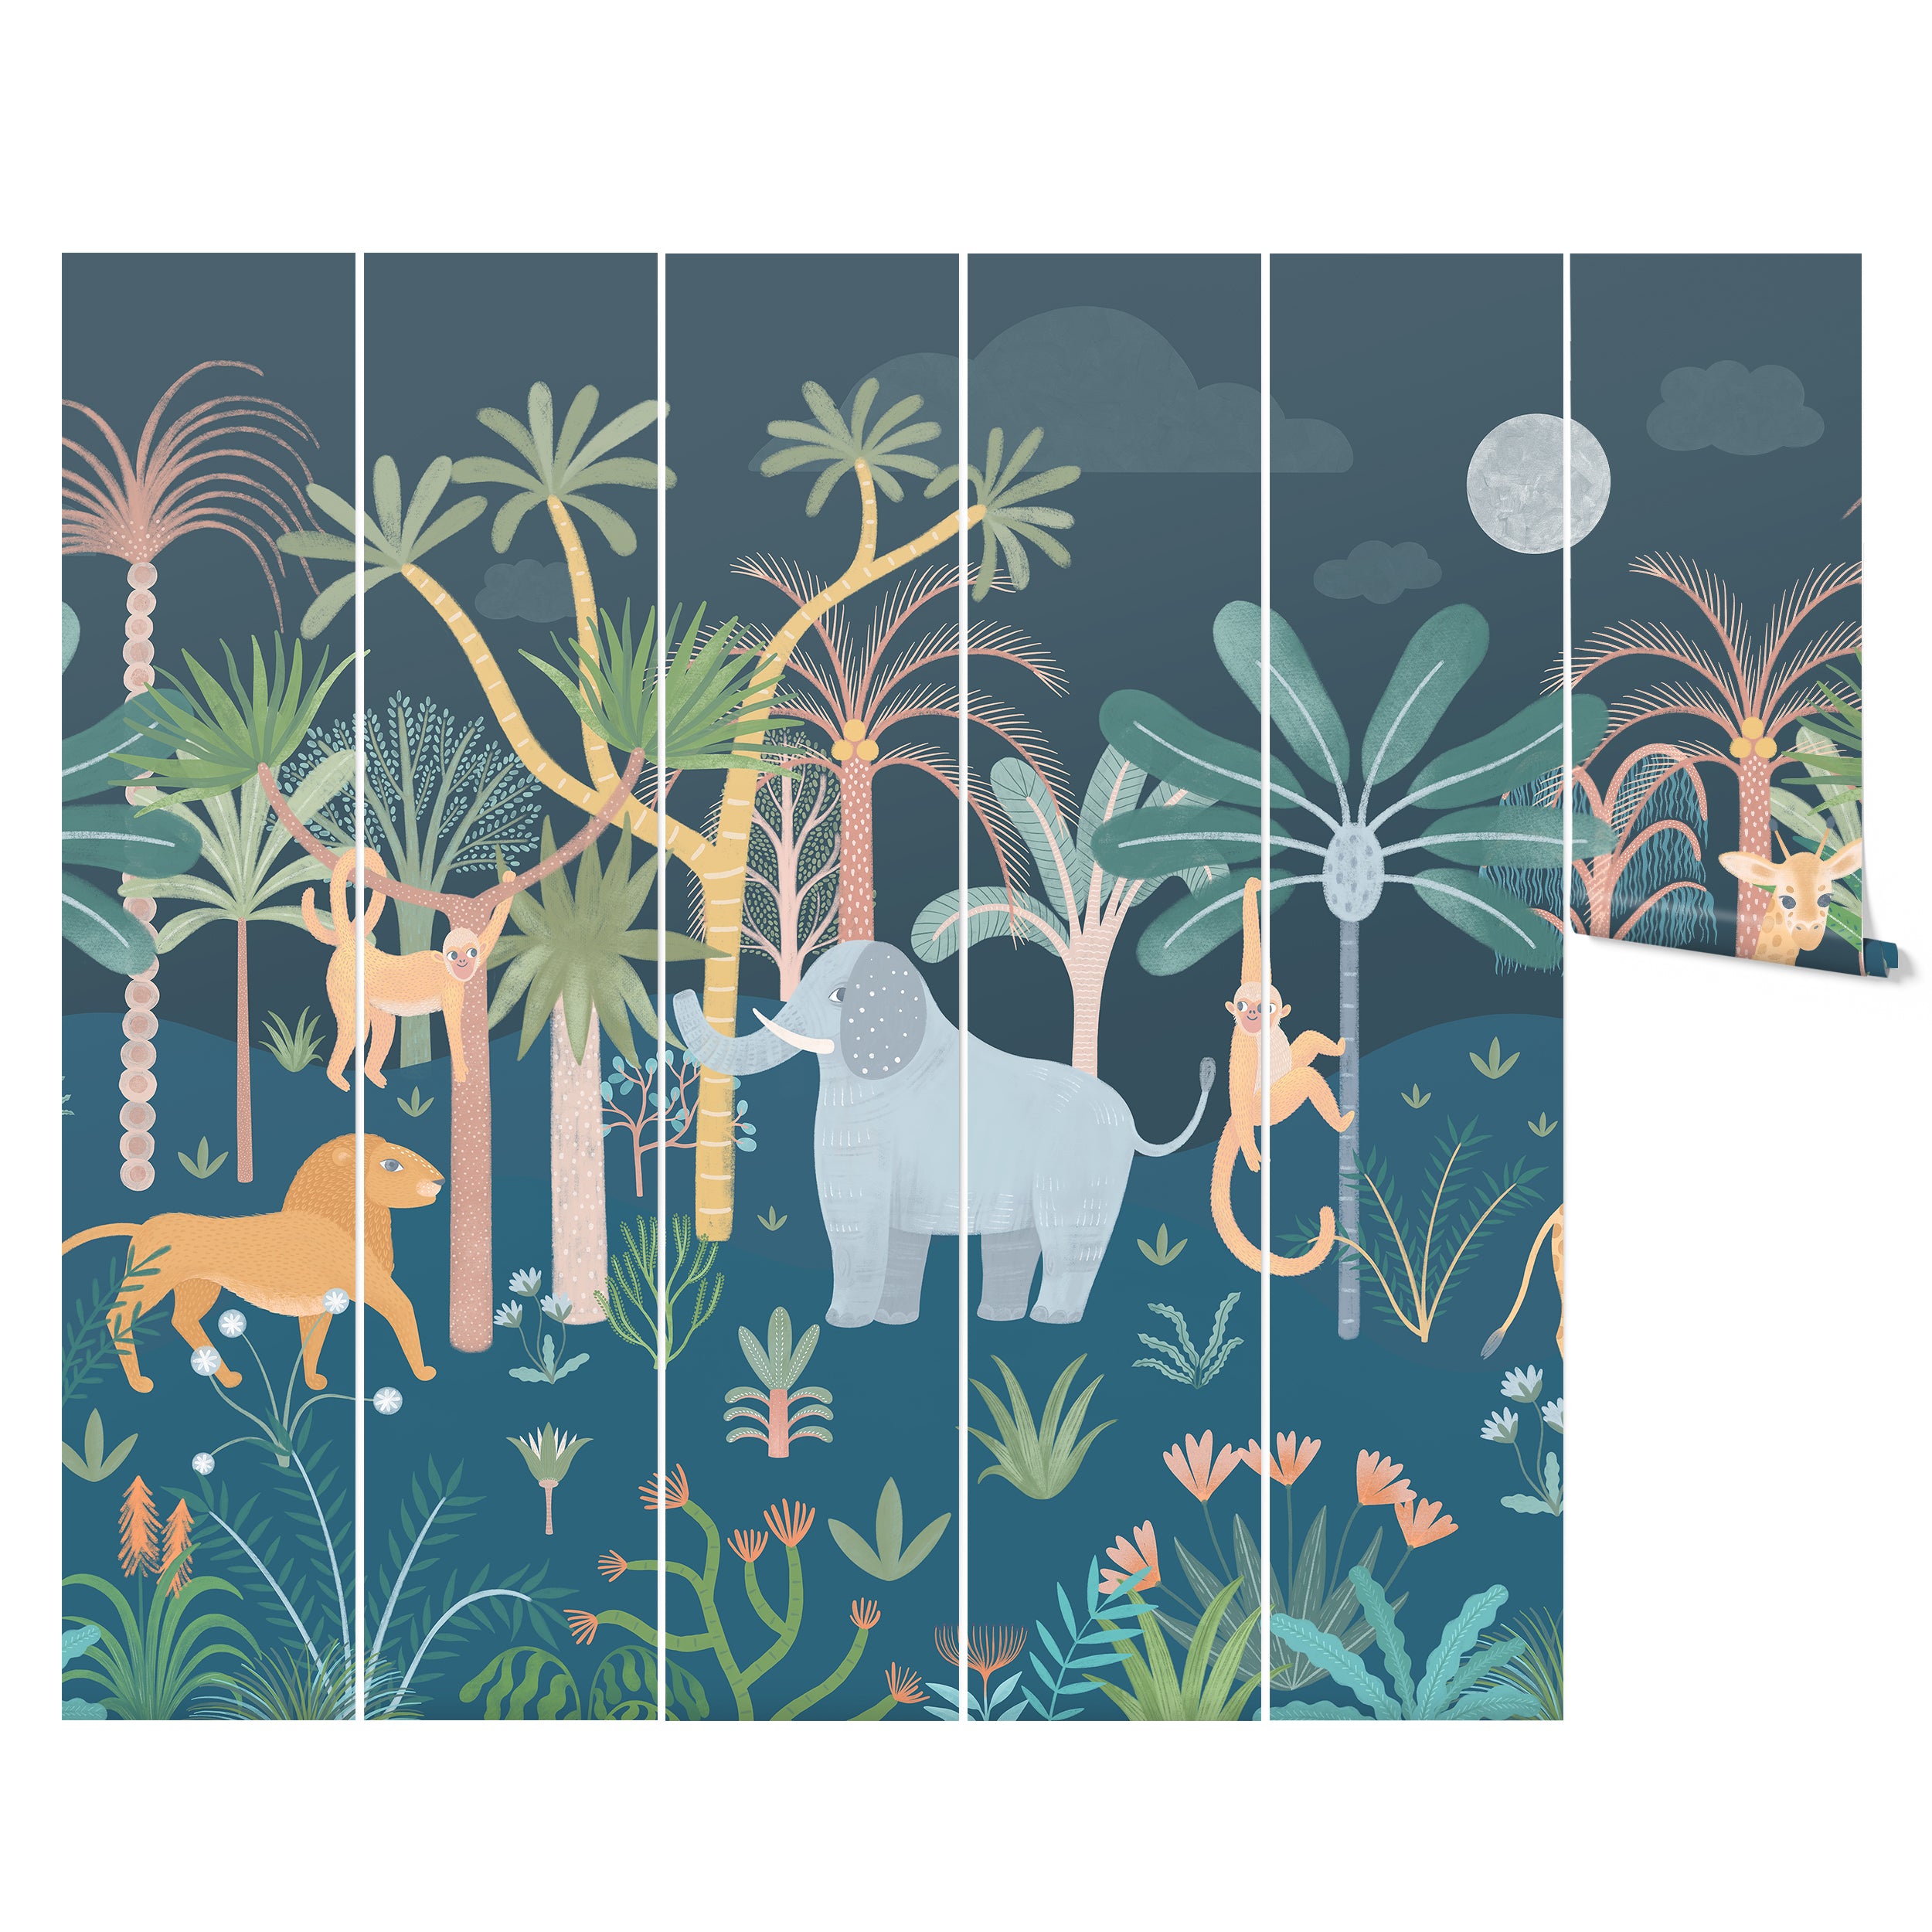 A full view of the African Jungle Wallpaper Mural spread across multiple panels, showcasing a rich tapestry of jungle animals like elephants and leopards among tropical trees and plants under a moonlit sky.